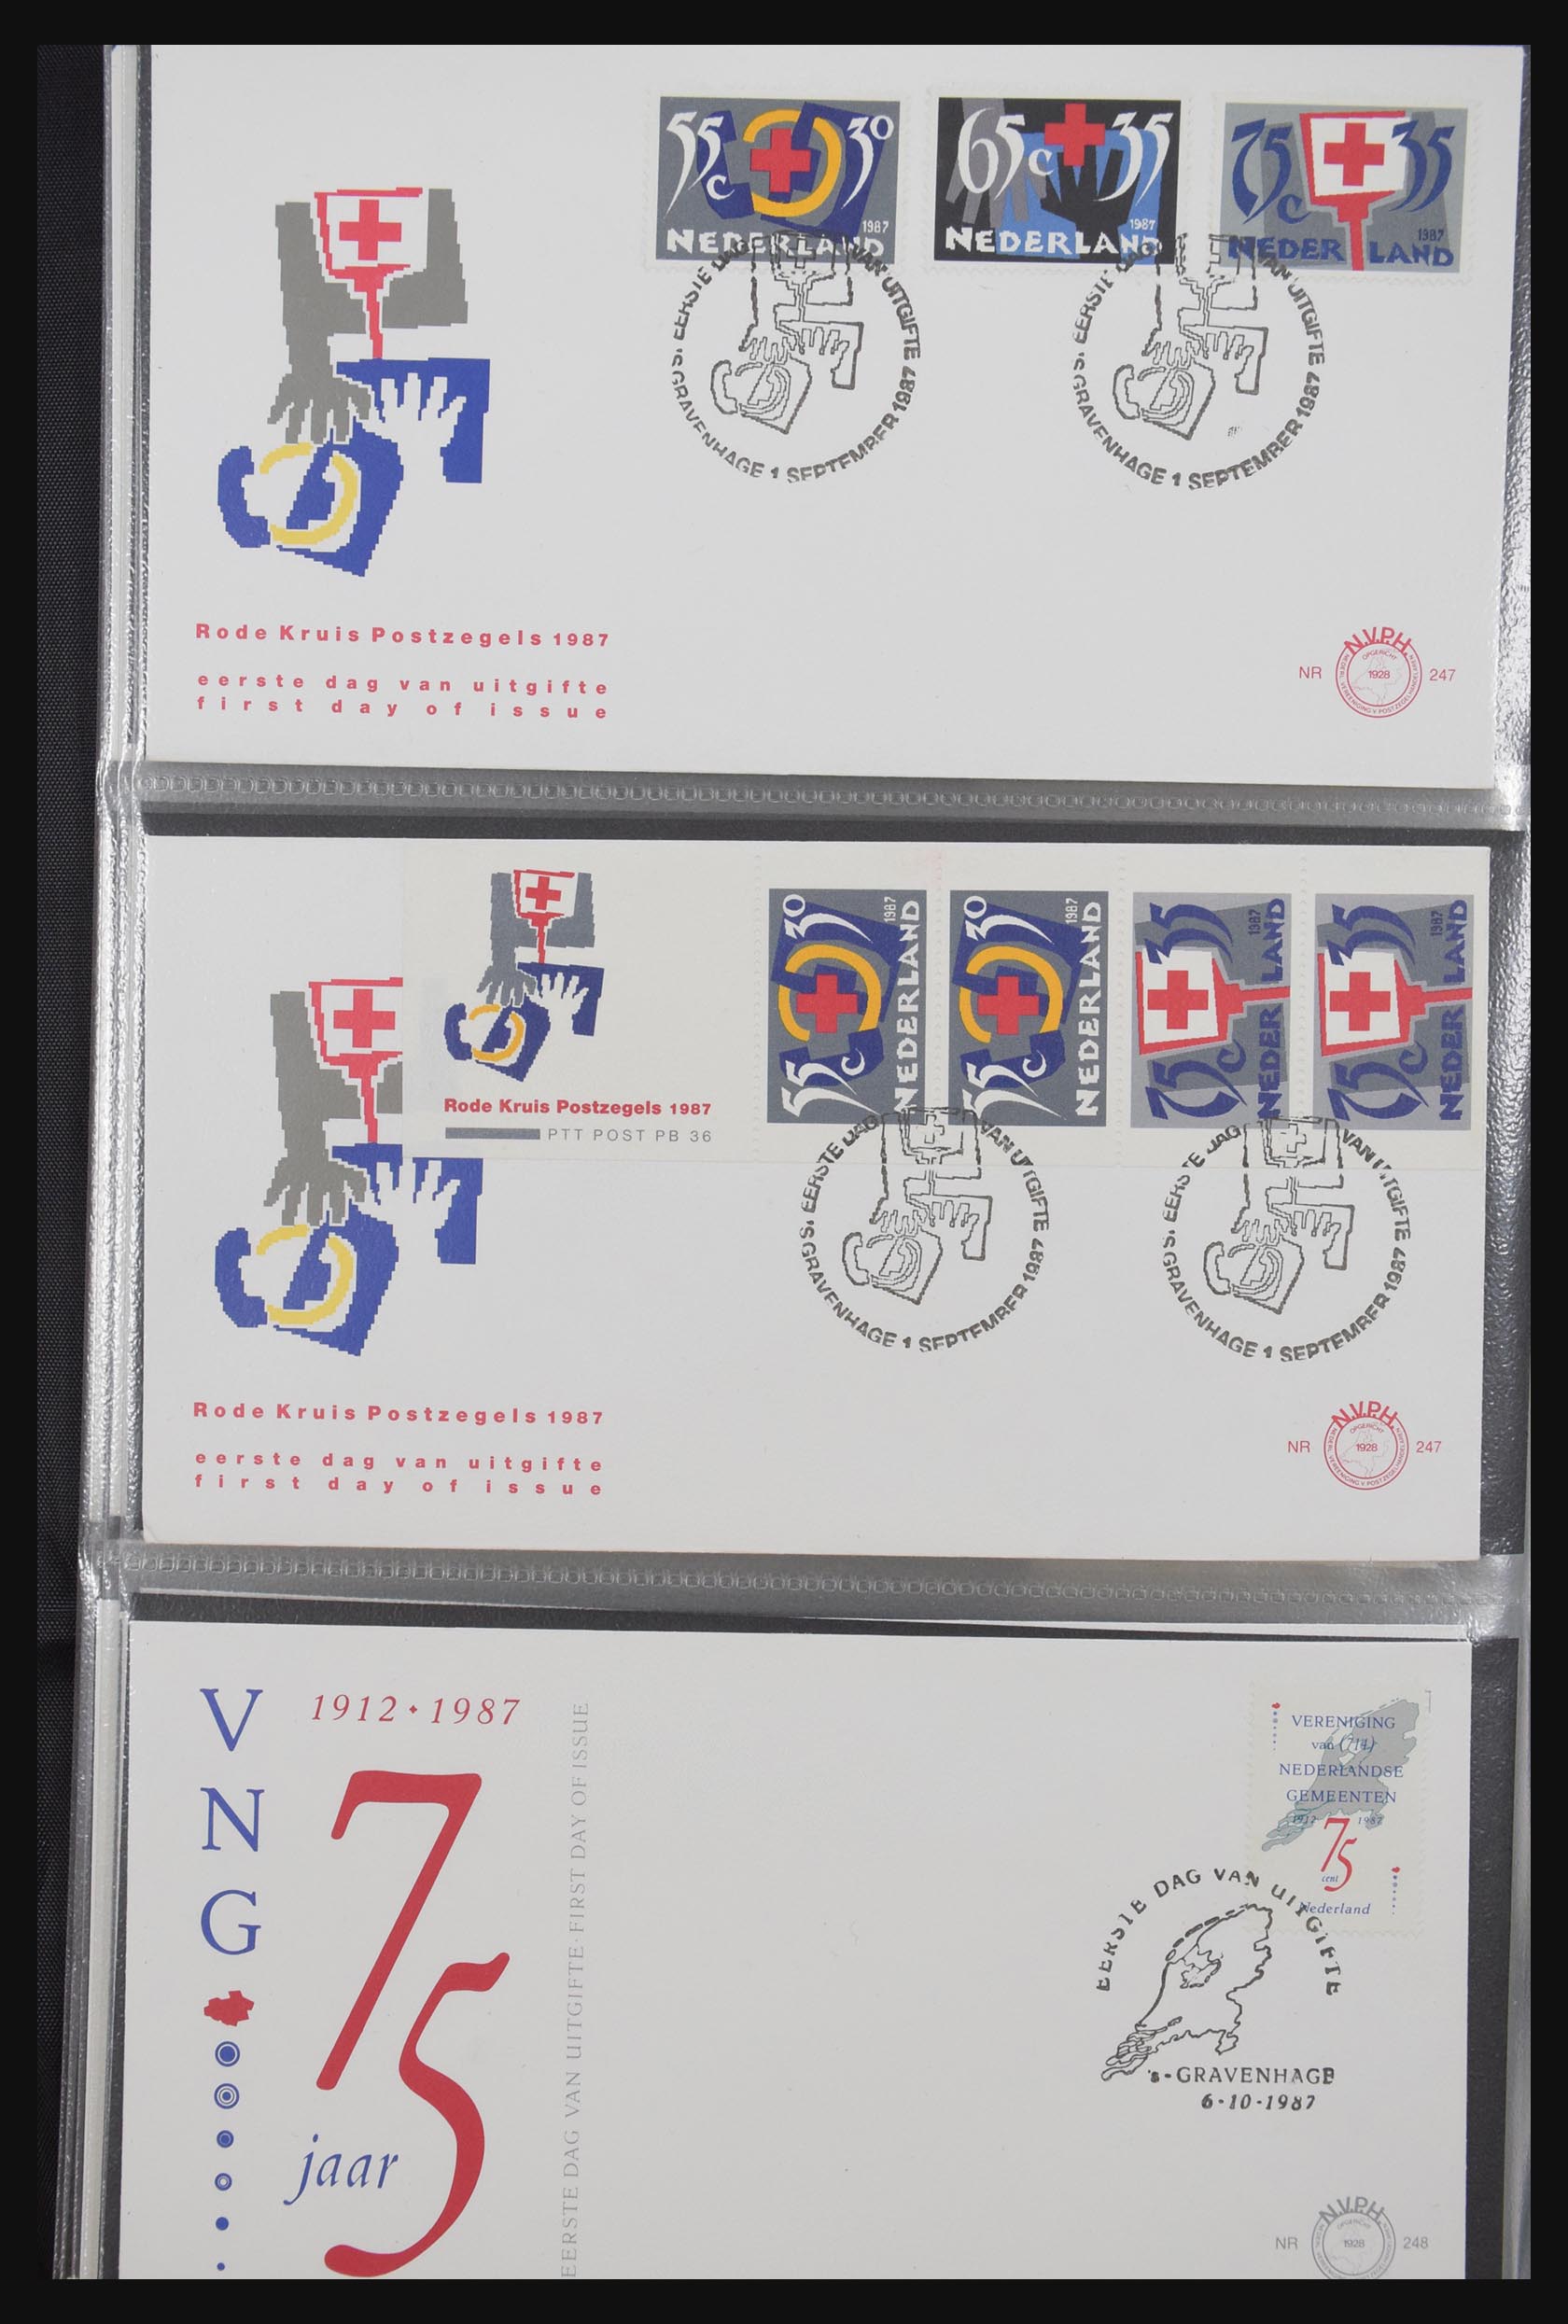 31301 092 - 31301 Netherlands FDC's 1950-2006.